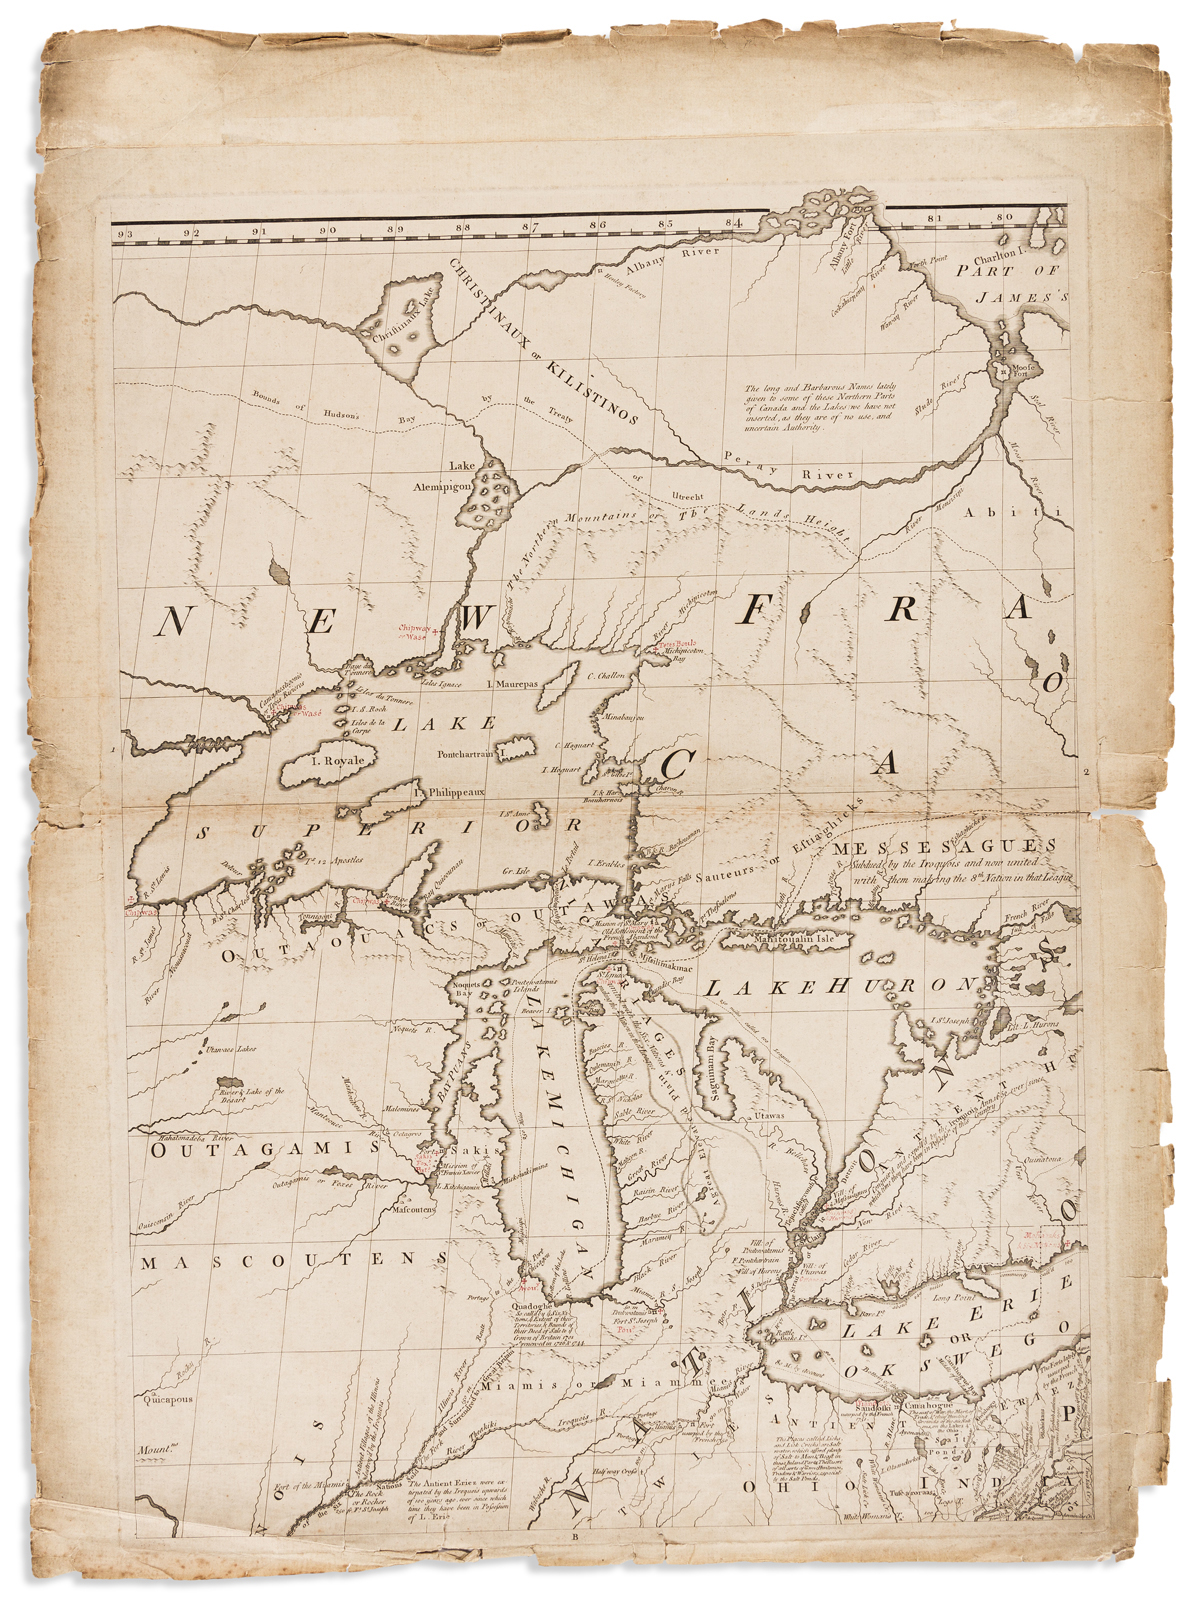 MITCHELL, JOHN. [Sheet 2, from]: A Map of the British and French Dominions in North America.